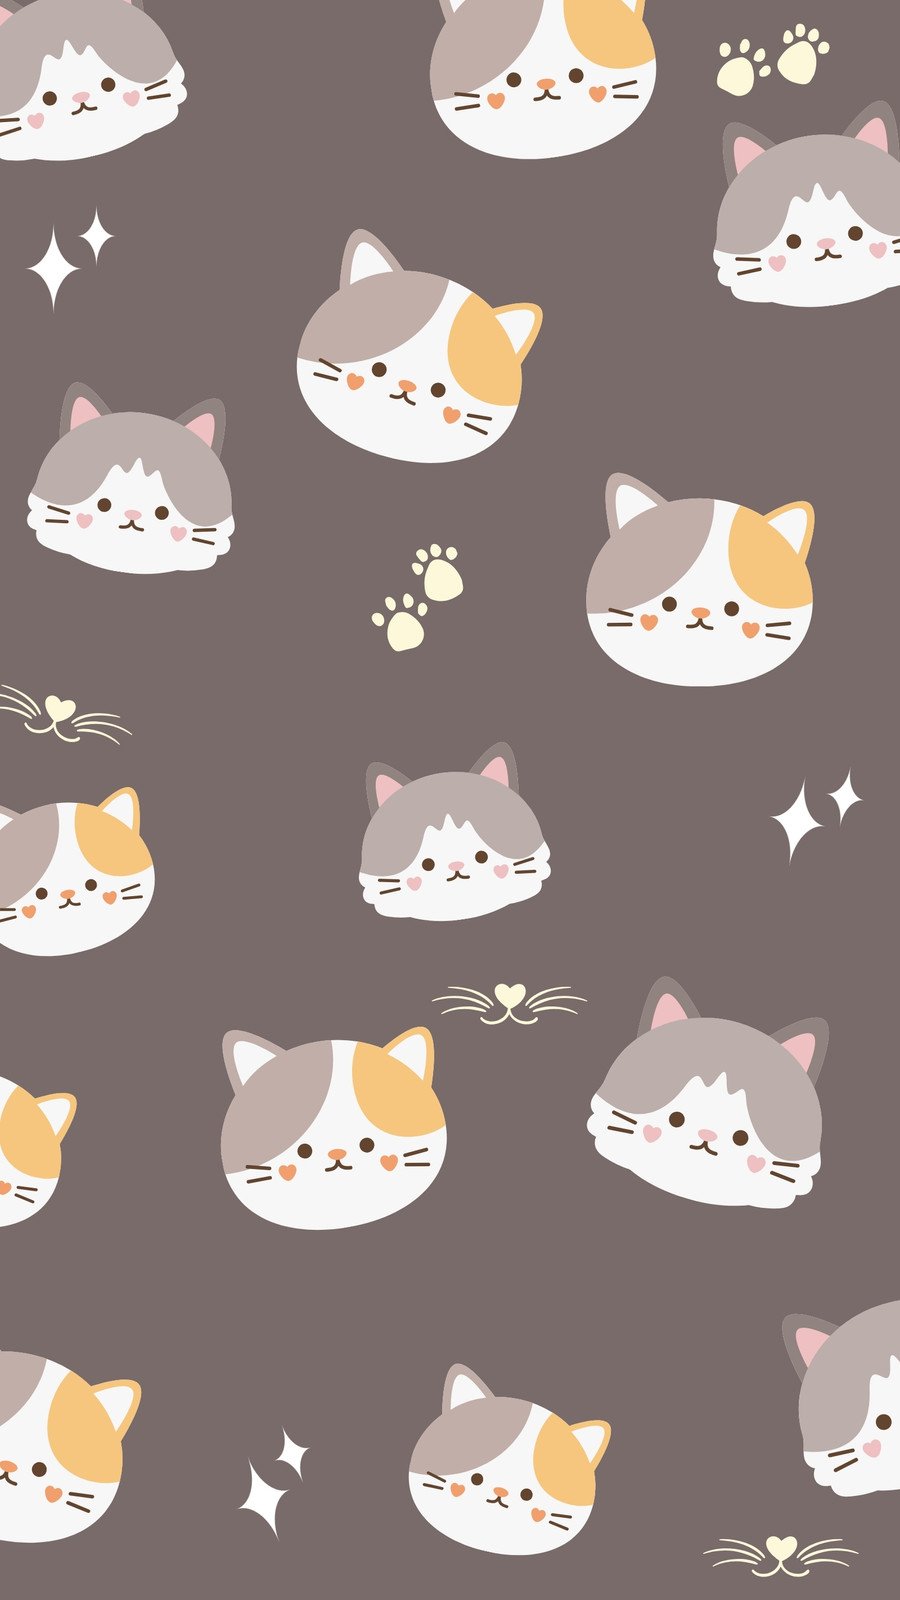 Page 7 - Free customizable cat phone wallpaper templates | Canva